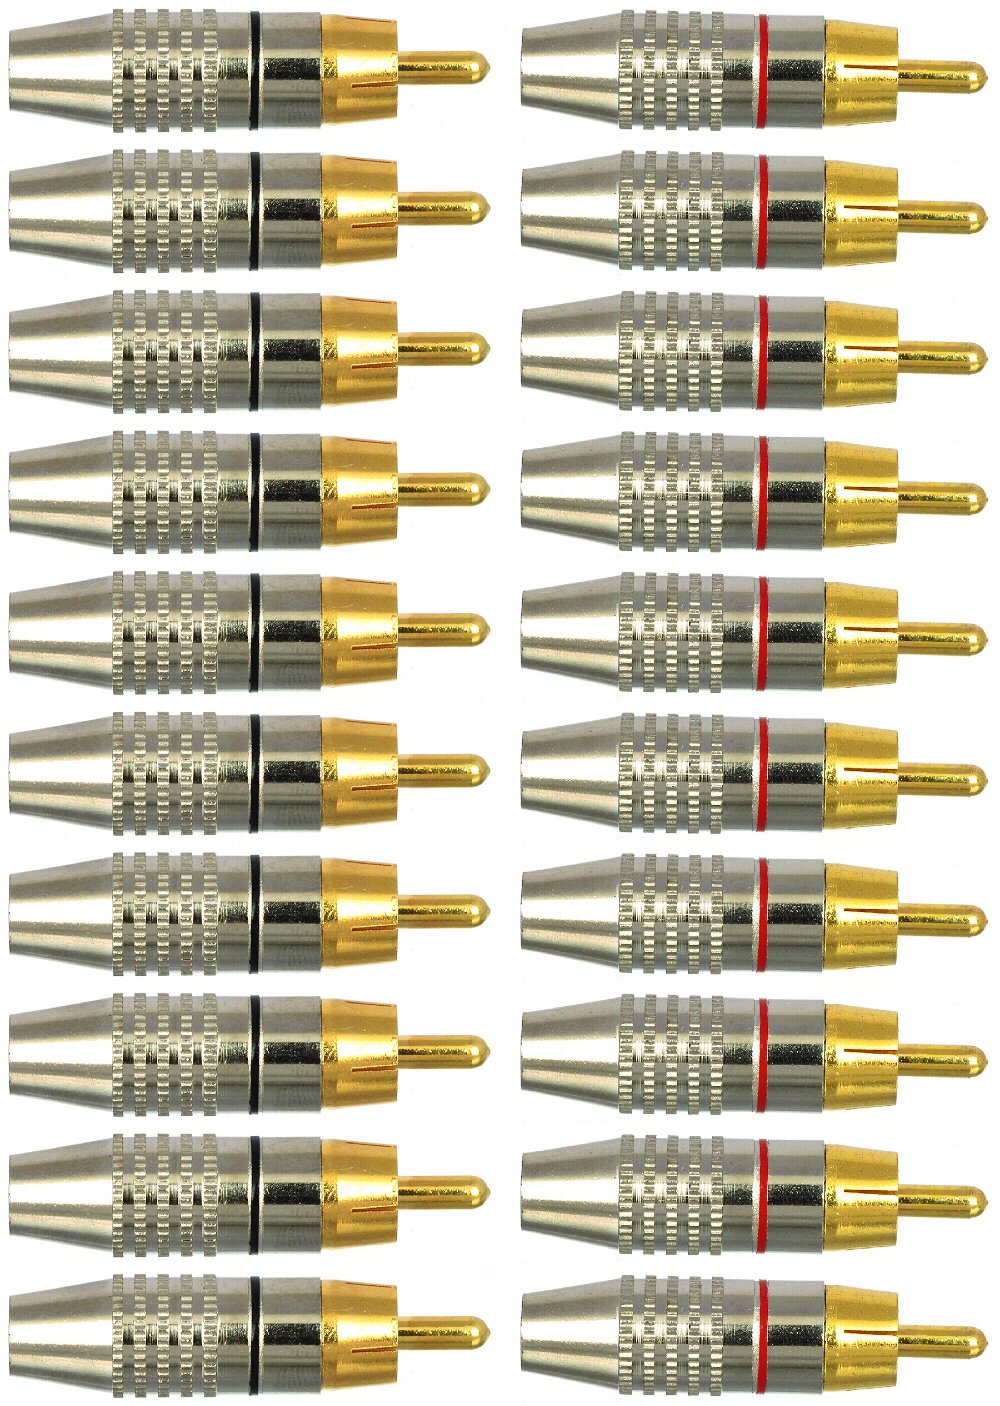  [AUSTRALIA] - CESS RCA Plug Solder Gold Audio Video Adapter Cable Connector (20 Pack)